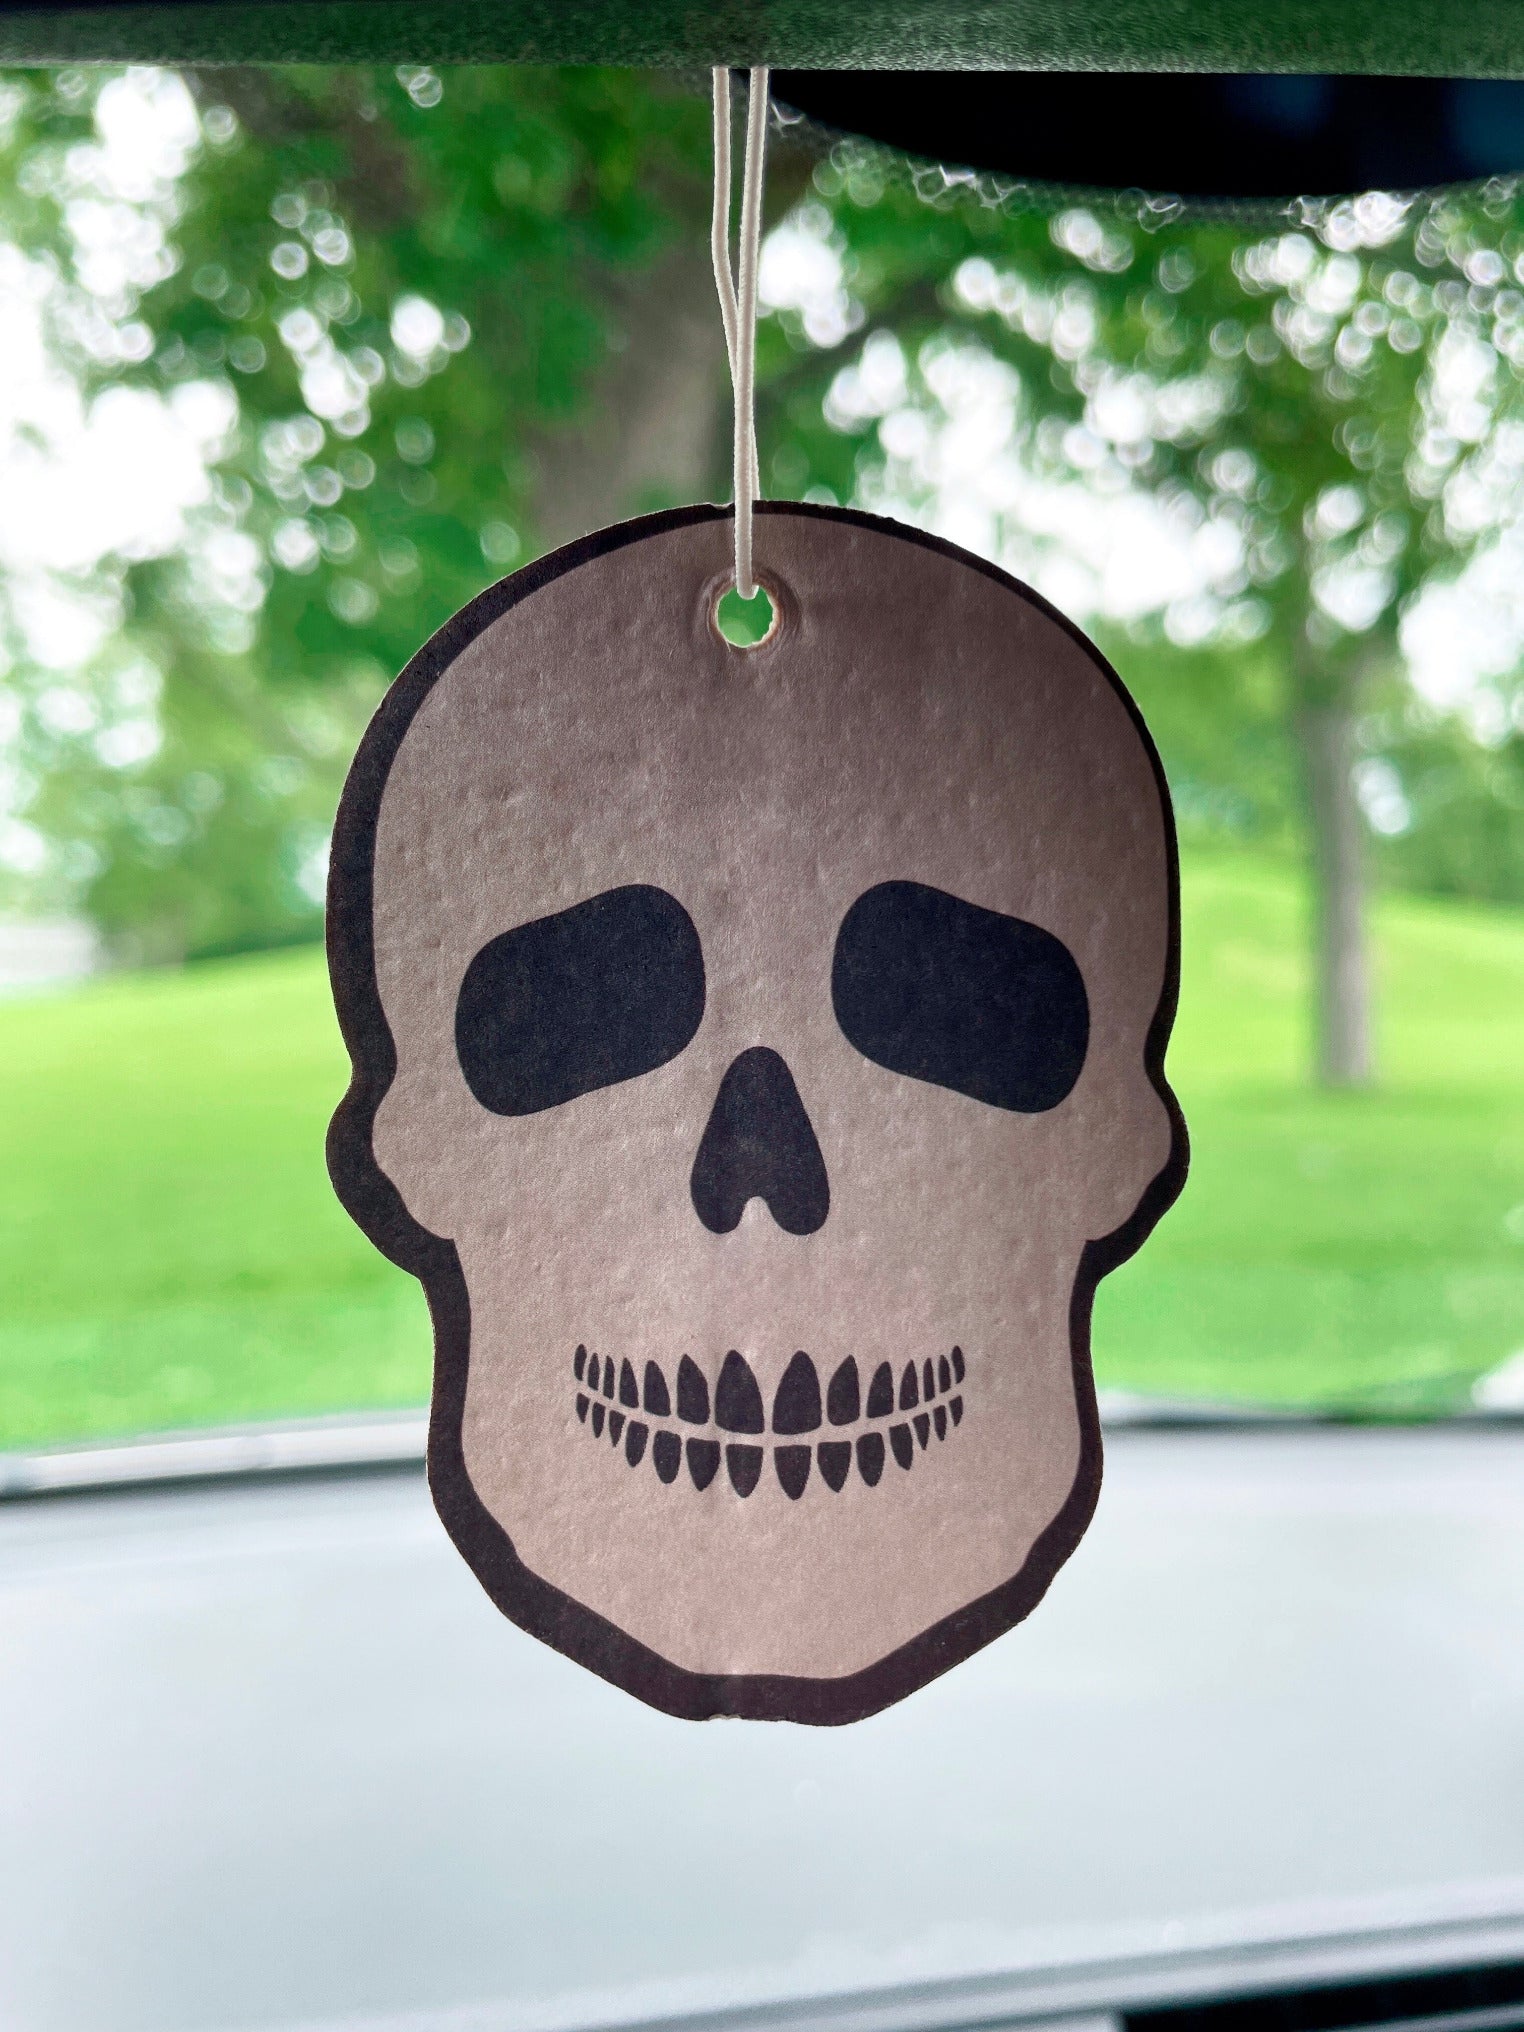 Pictured is an air freshener in the shape of a skeleton skull.